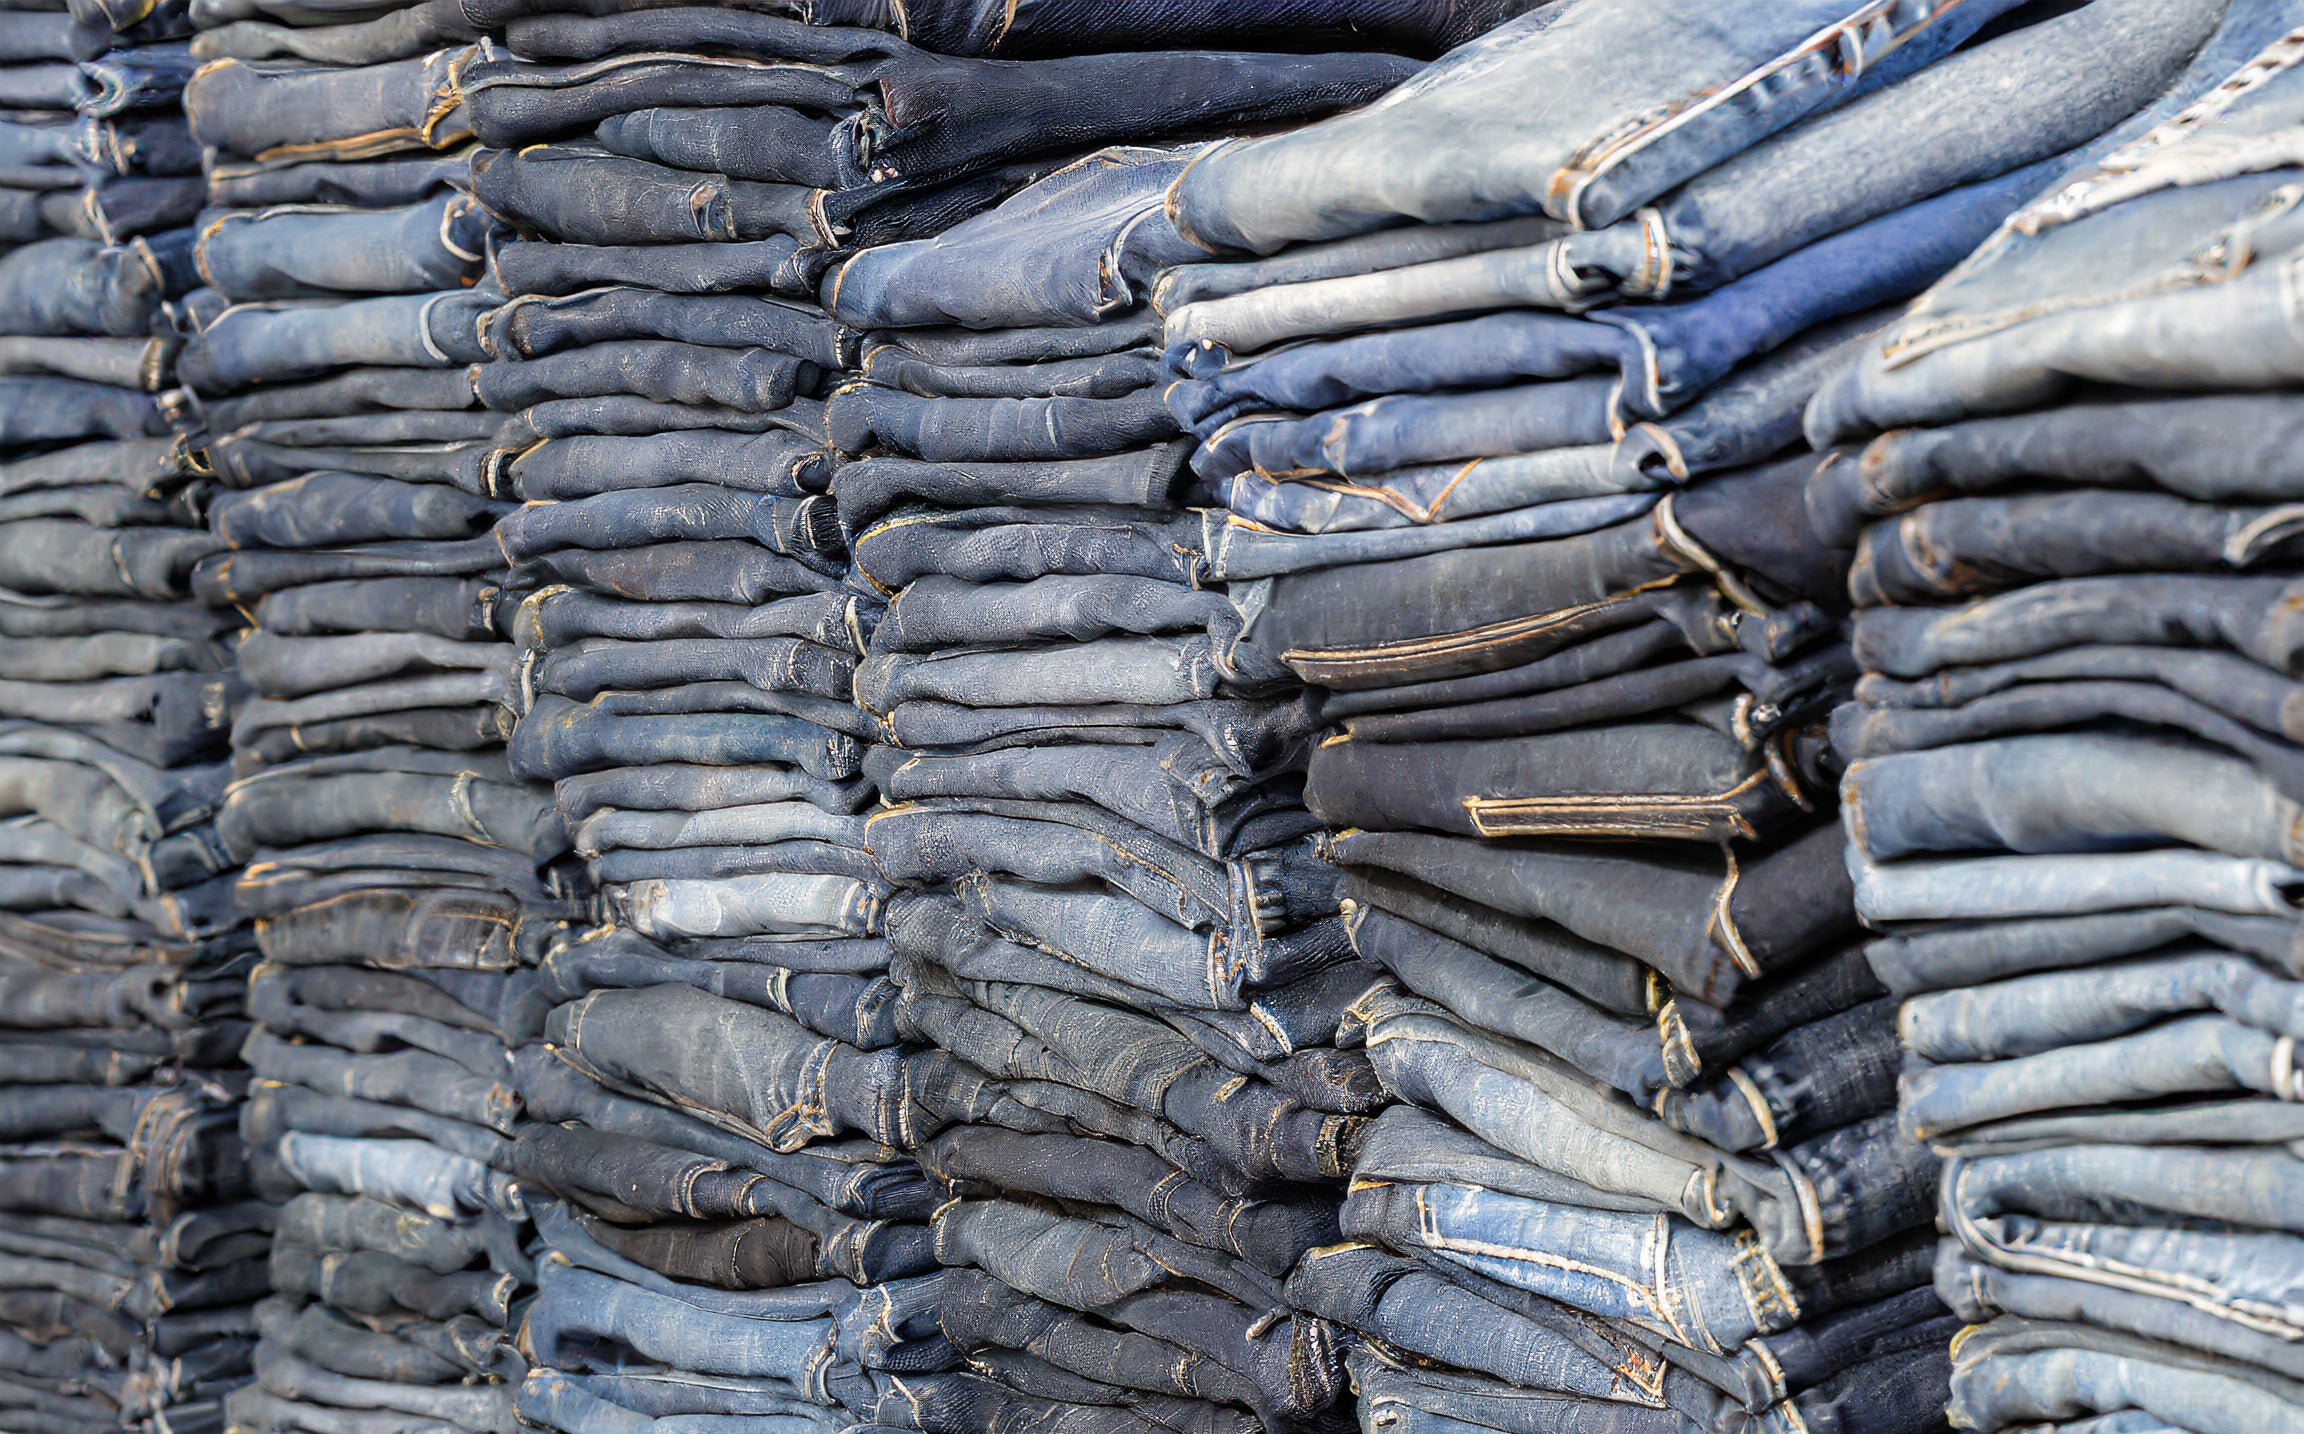 Stacks_of_used_jeans